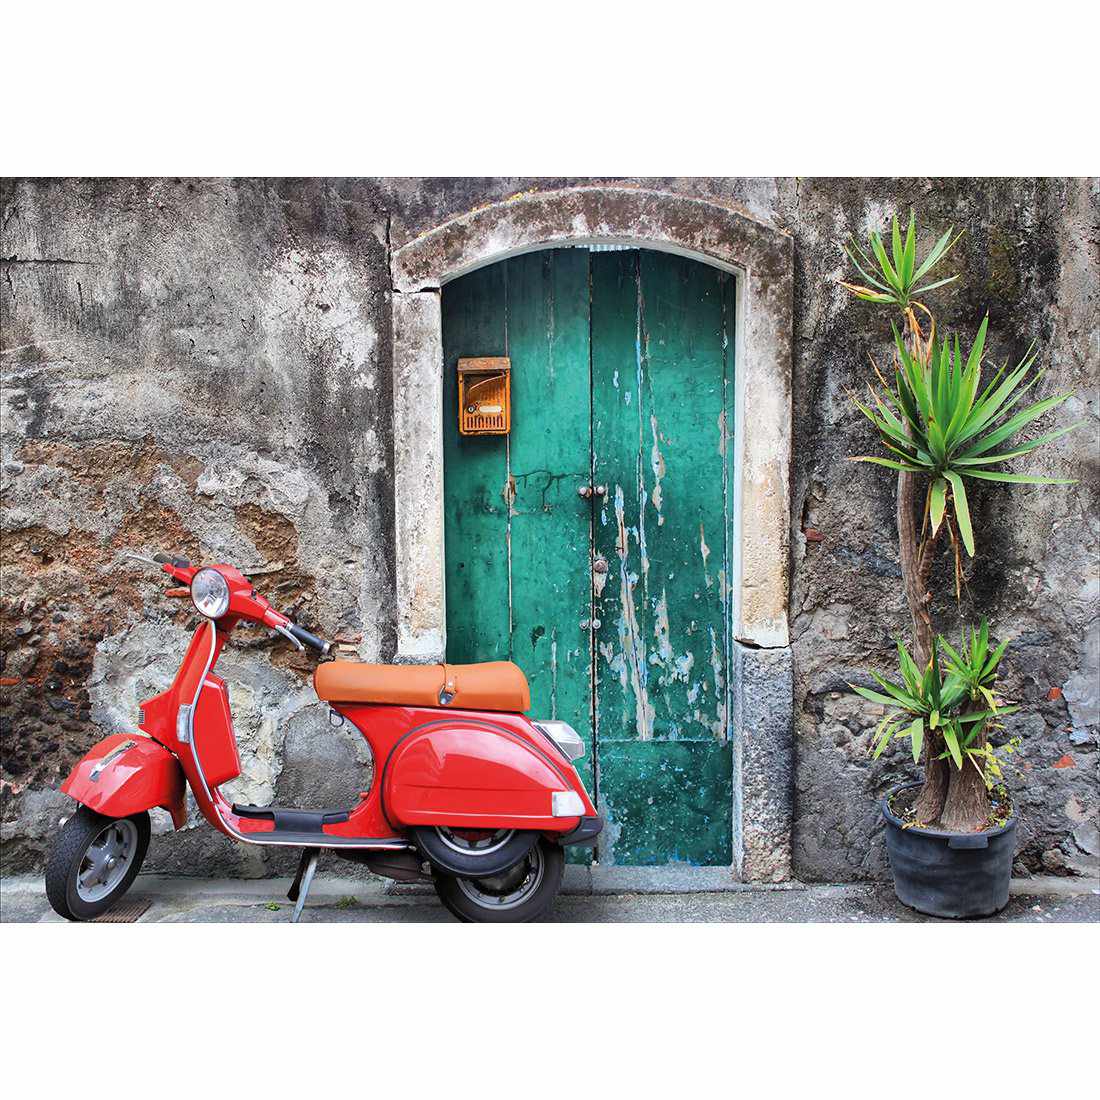 Vintage Door And Scooter-Acrylic-Wall Art Design-With Border-Acrylic - No Frame-45x30cm-Wall Art Designs